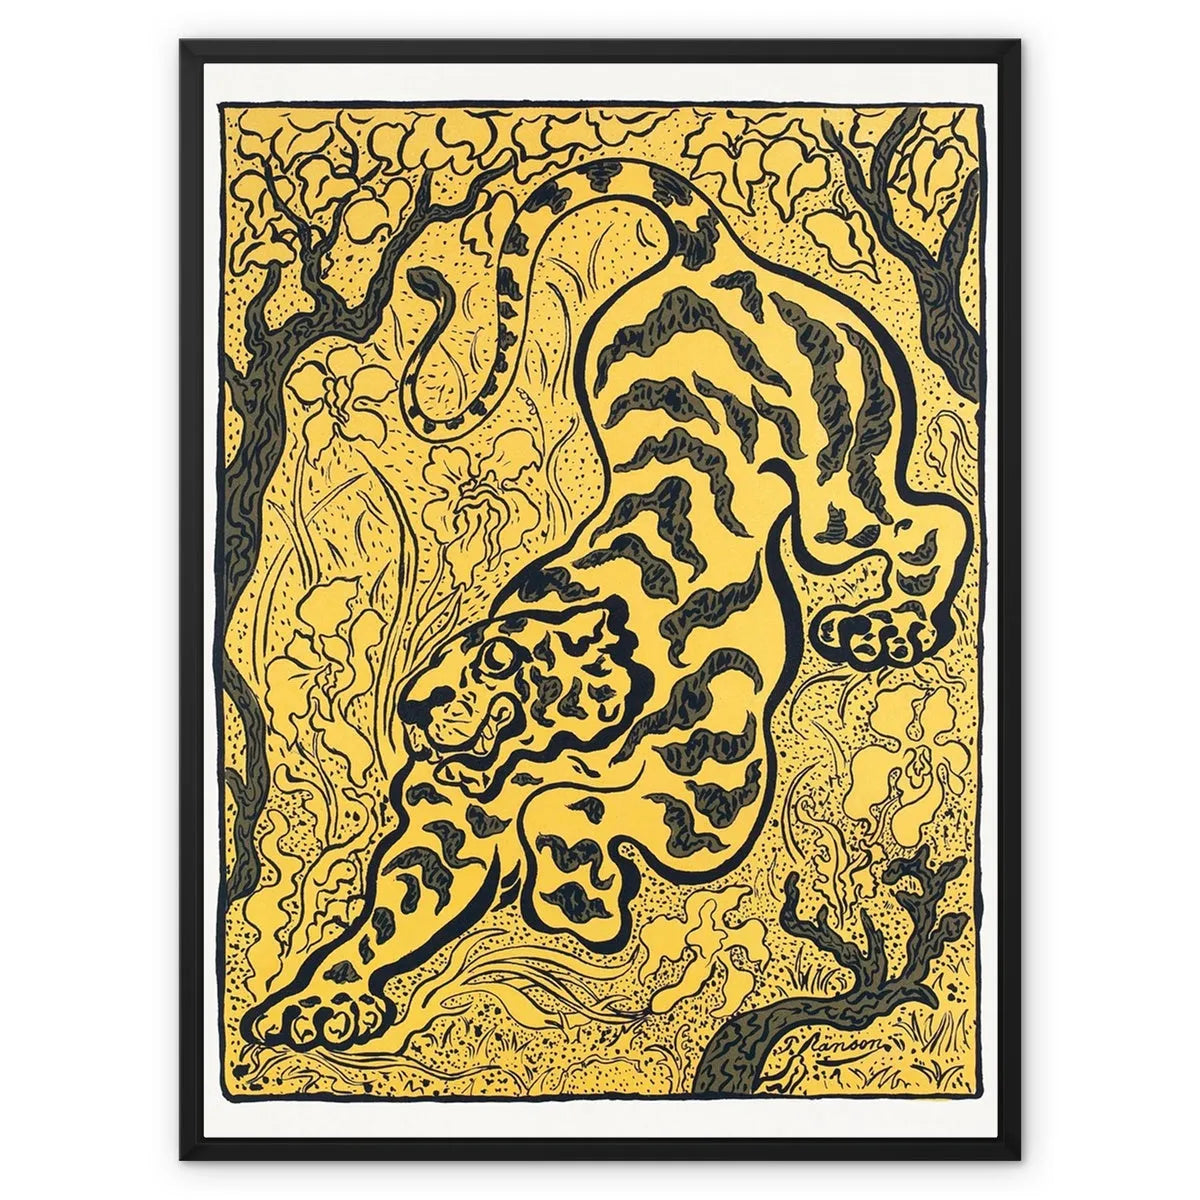 Tiger In The Jungle By Paul Ranson Framed Canvas - 24’x32’ - Posters Prints & Visual Artwork - Aesthetic Art